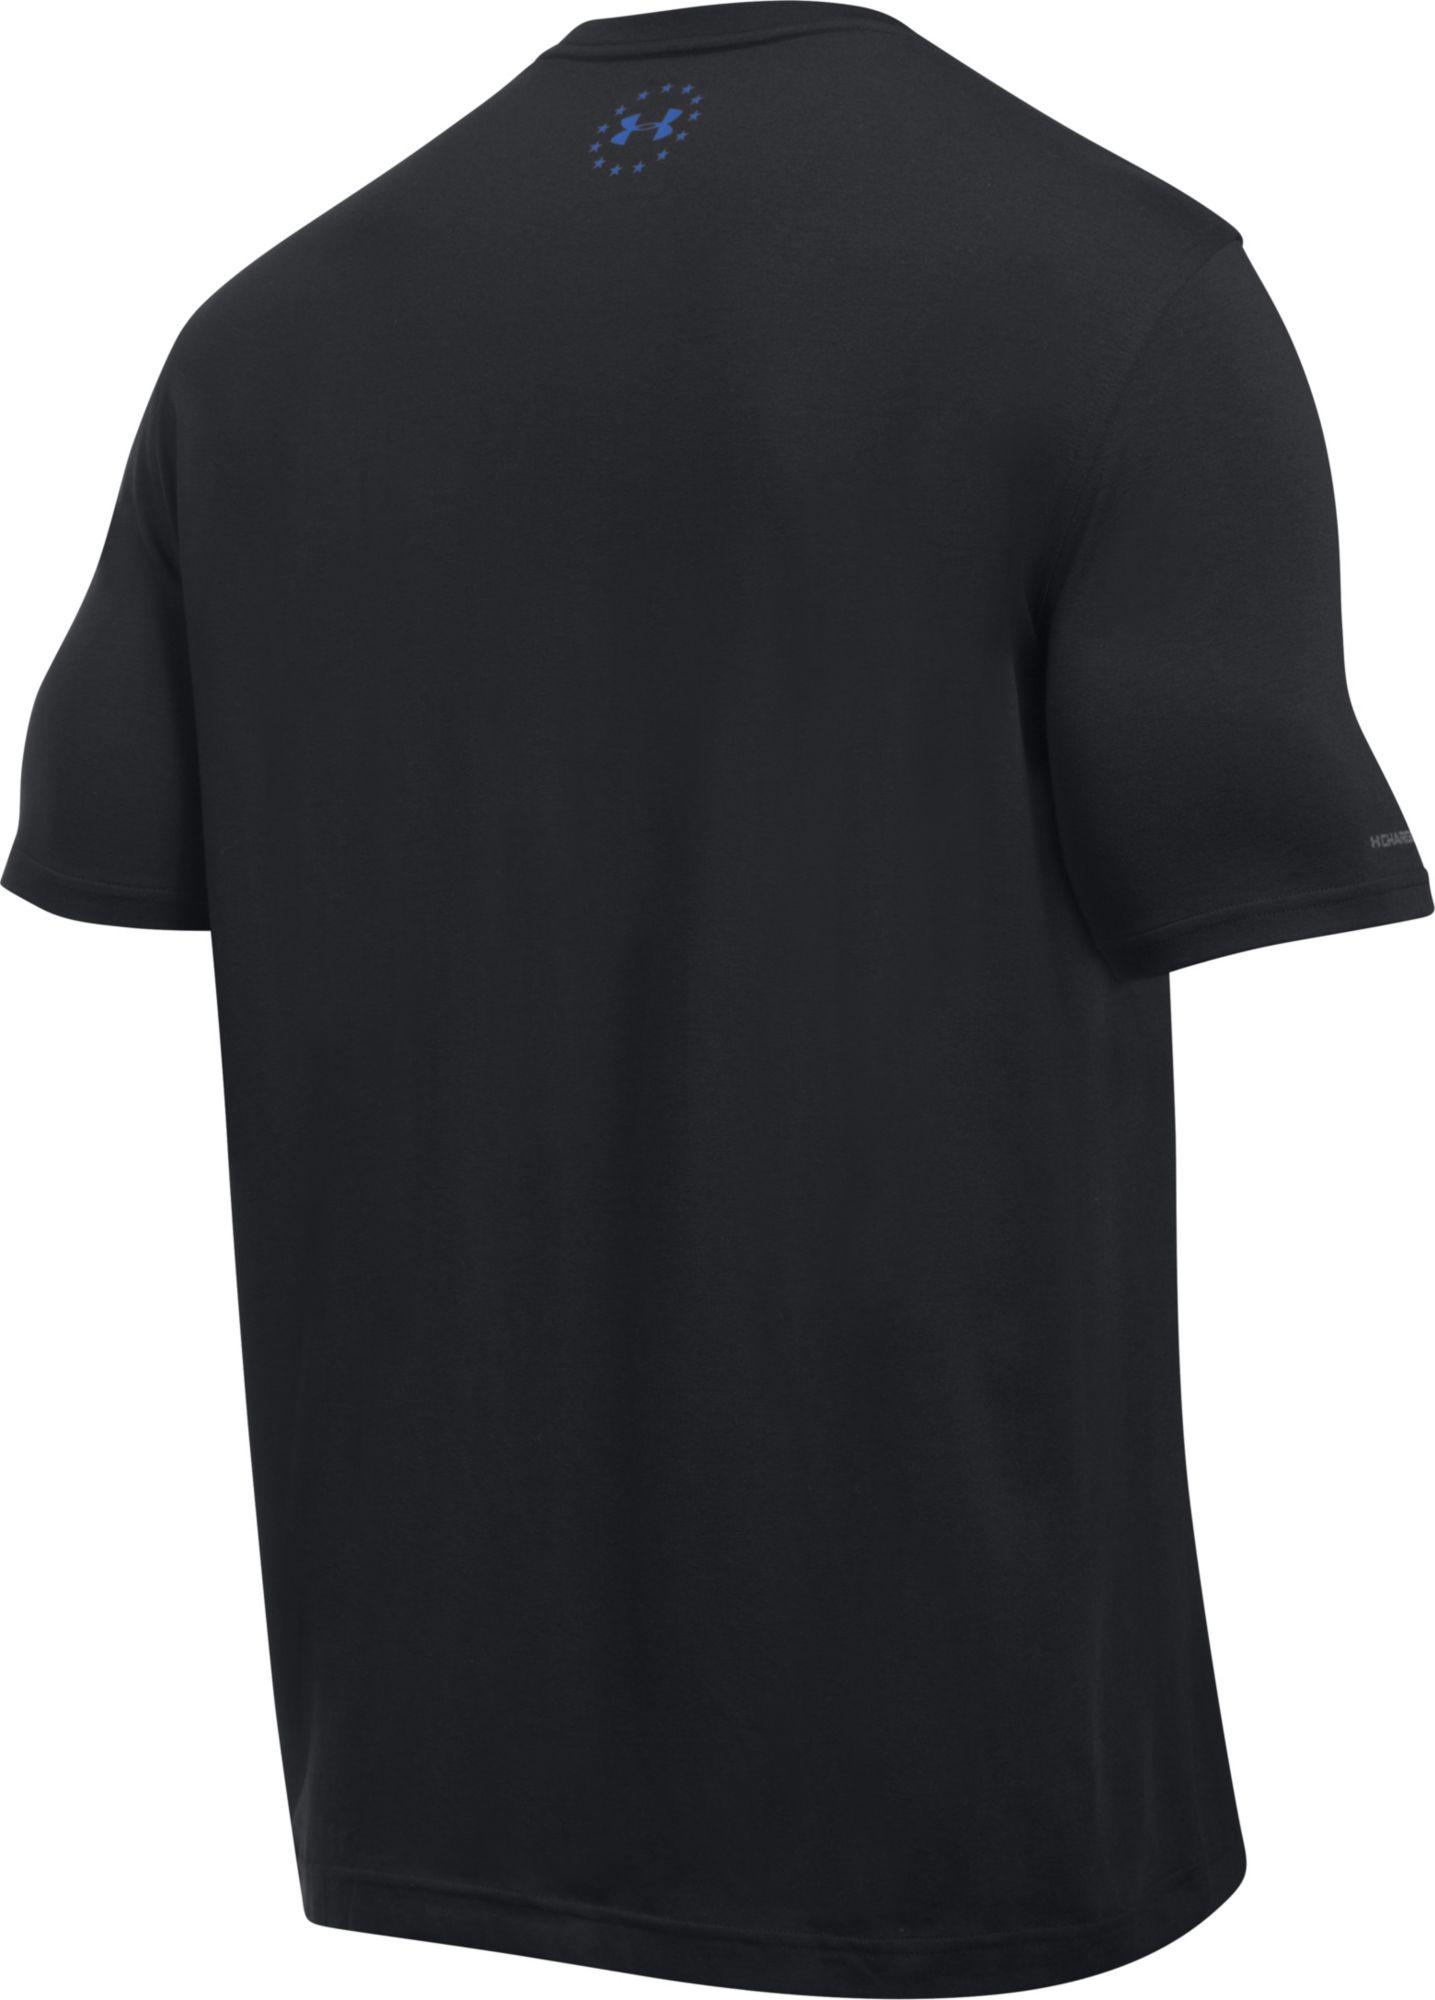 Lyst - Under Armour Police Thin Blue Line T-shirt in Black for Men